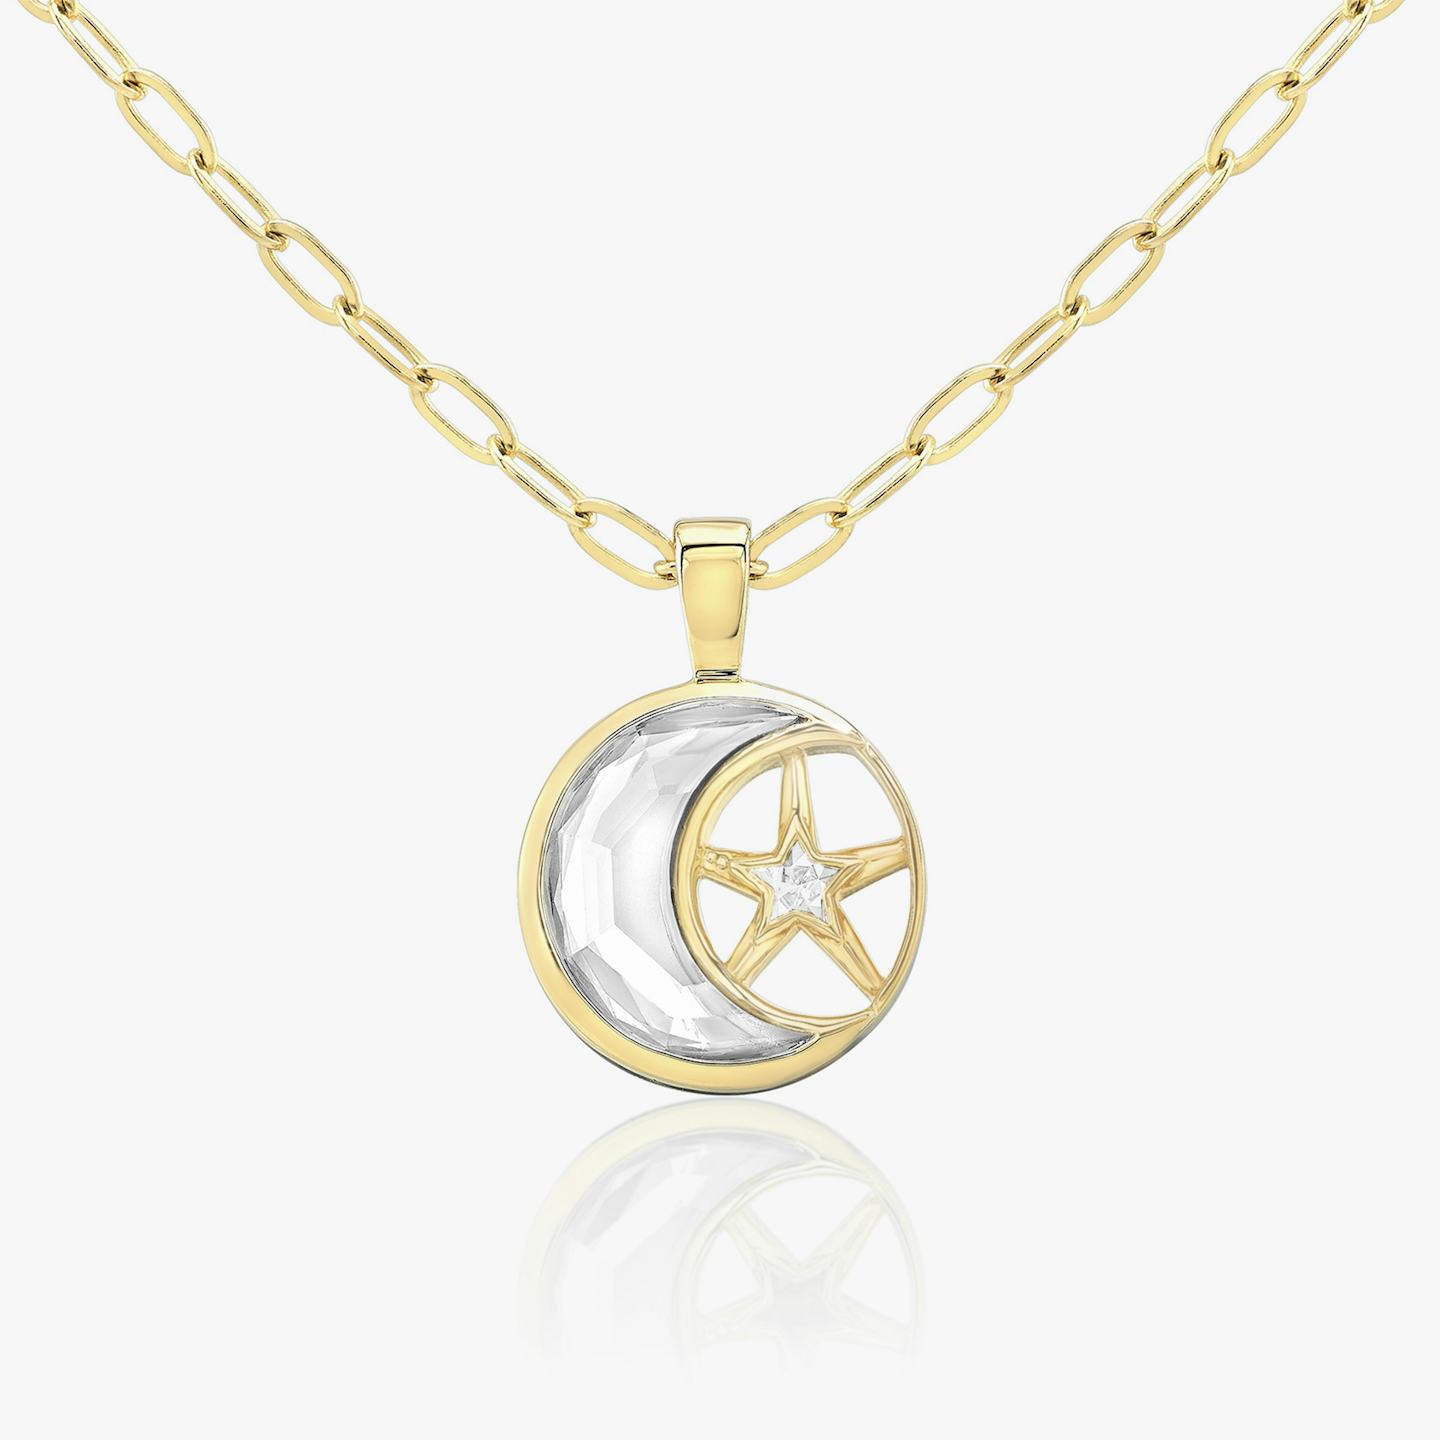 VRAI Solitaire Moon | 18k | 18k Yellow Gold | Chain length: 18-20